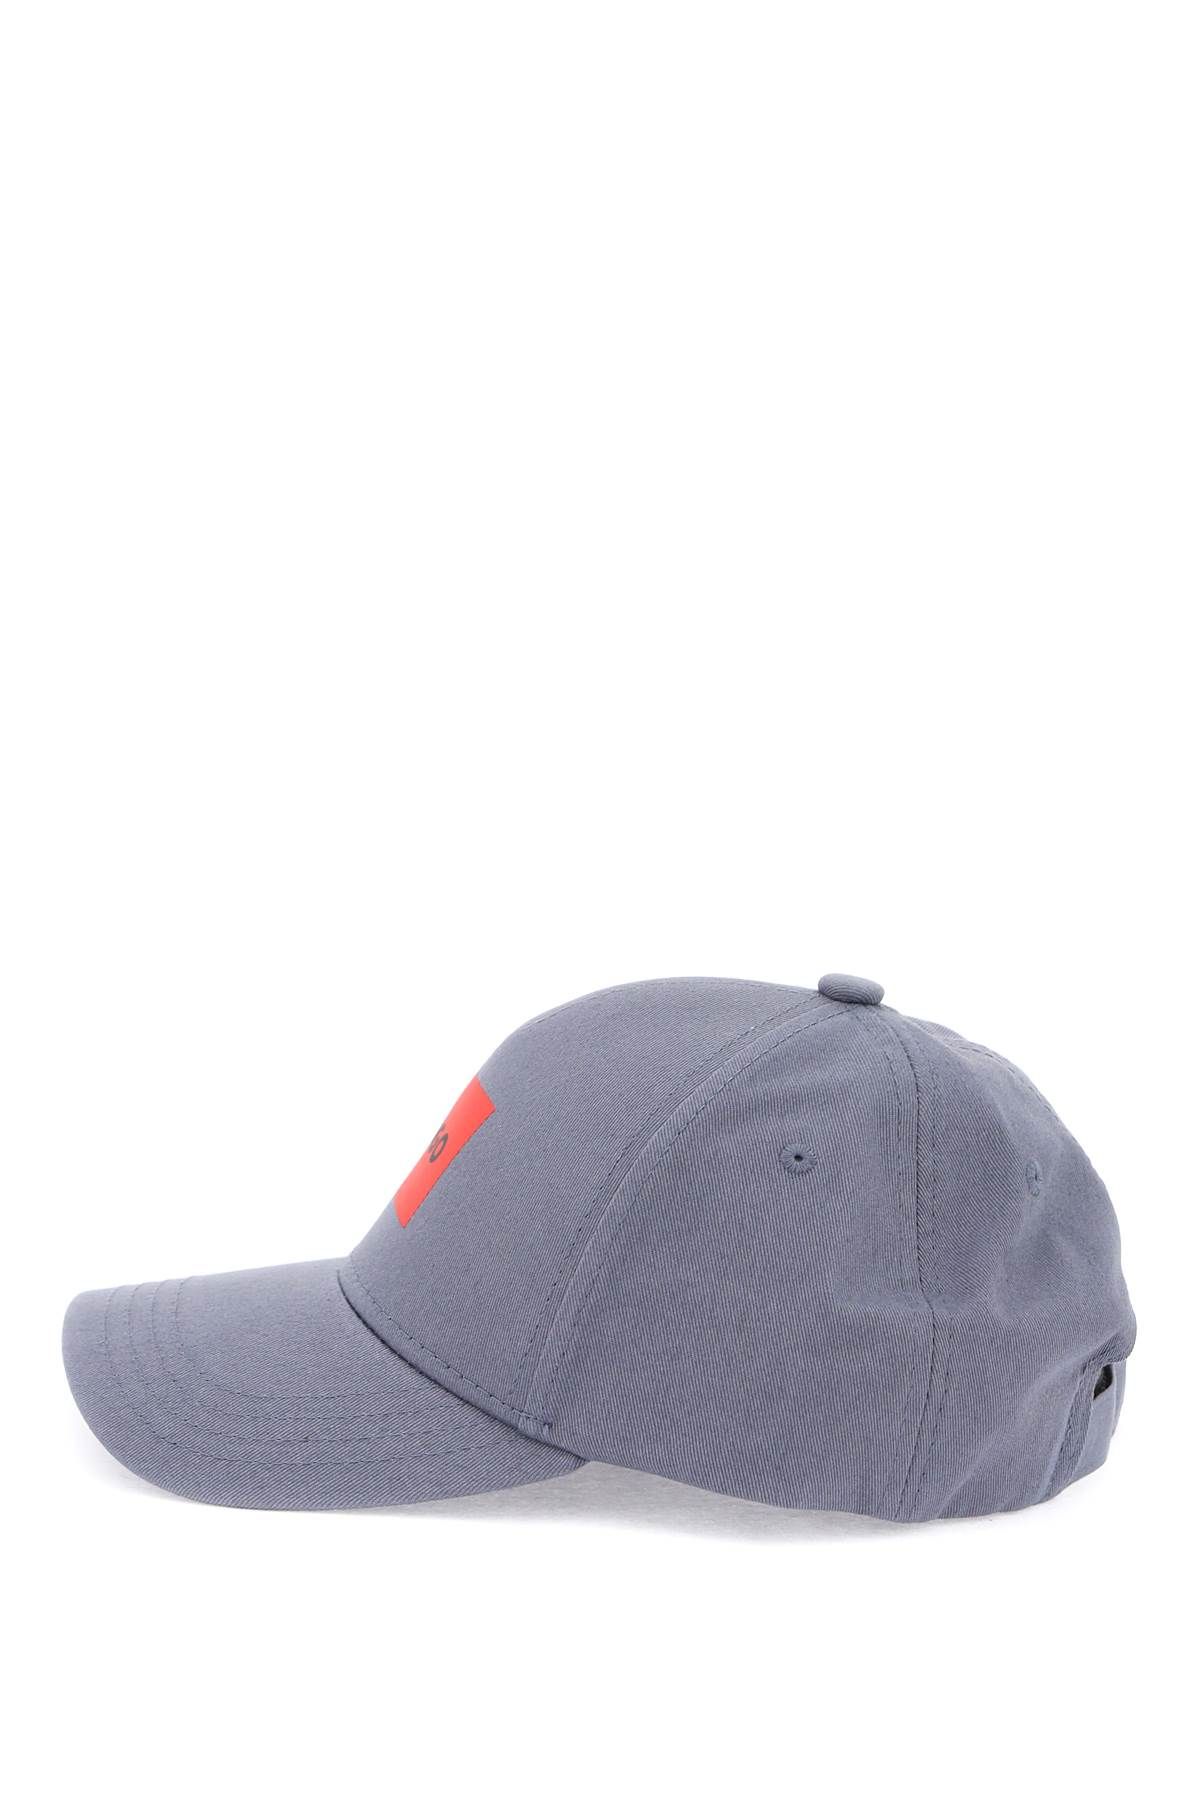 Shop Hugo Baseball Cap With Patch Design In Grey,blue